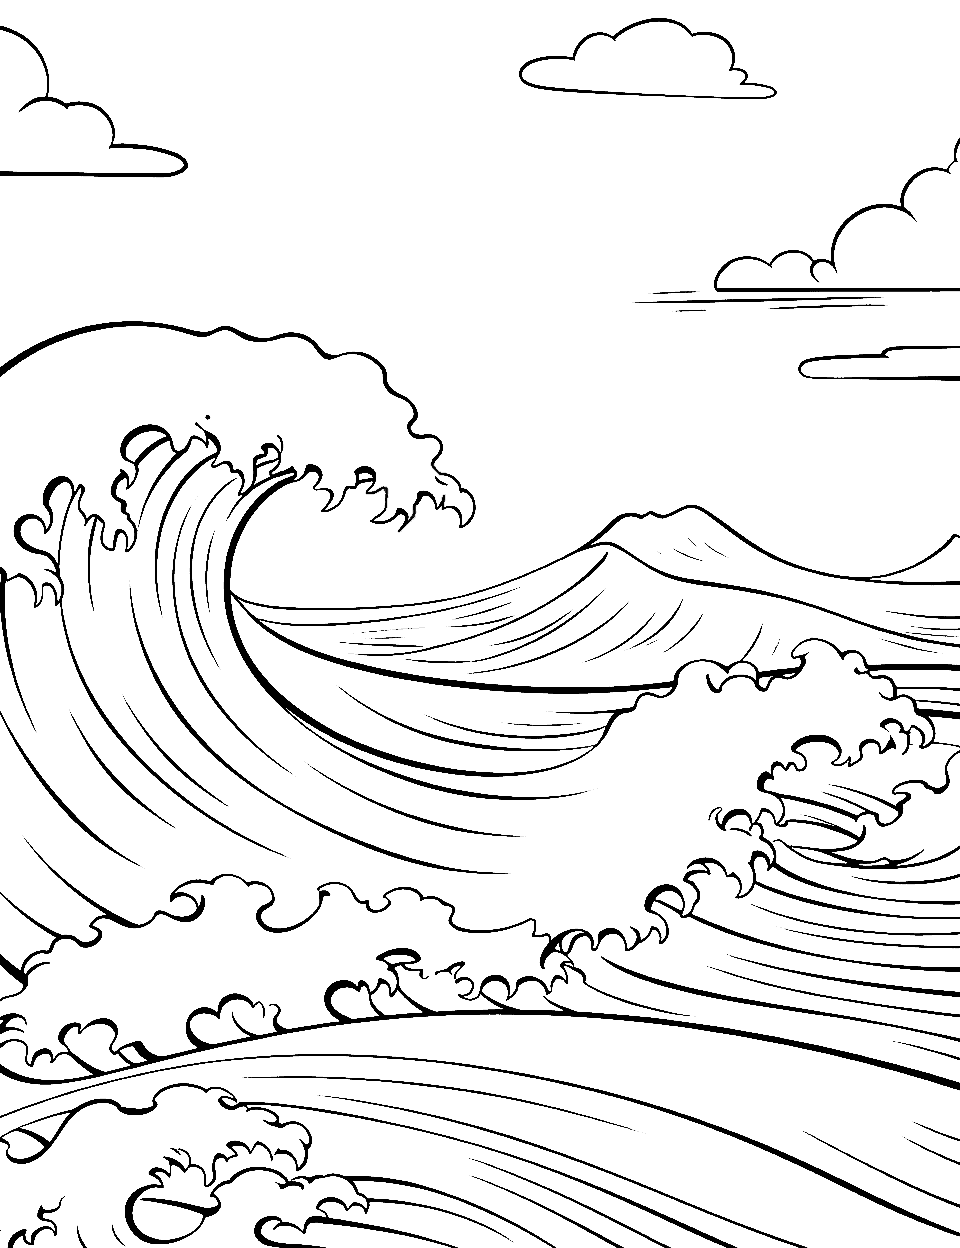 Realistic Ocean Wave Coloring Page - An accurate depiction of a single wave, showcasing the beautiful blue ocean.